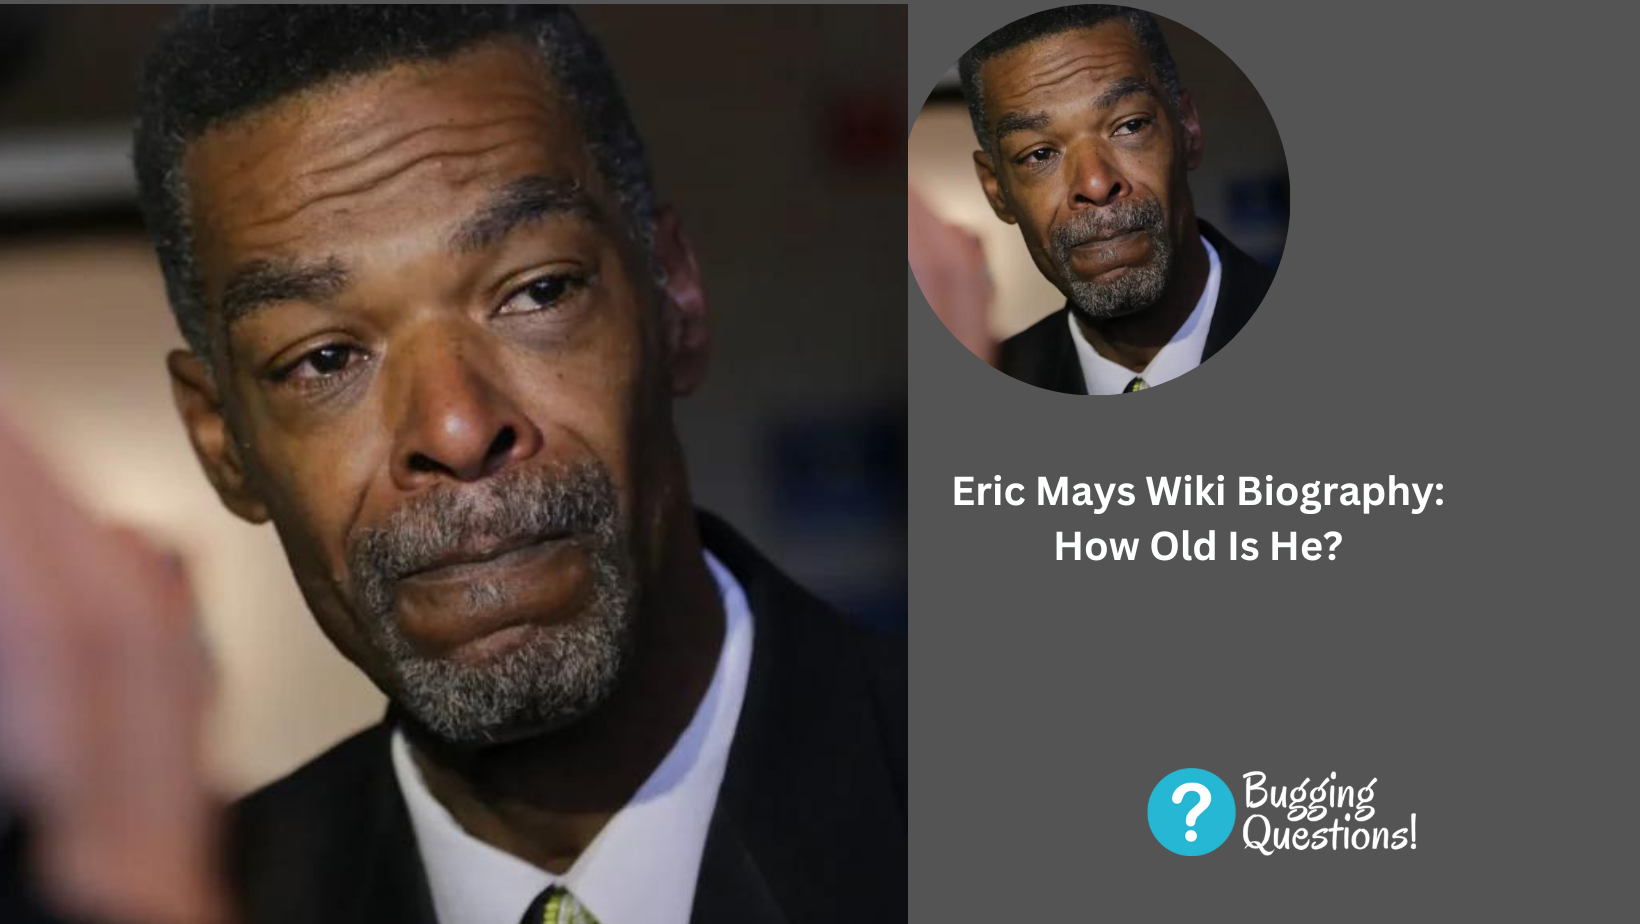 Eric Mays Wiki Biography: How Old Is He?